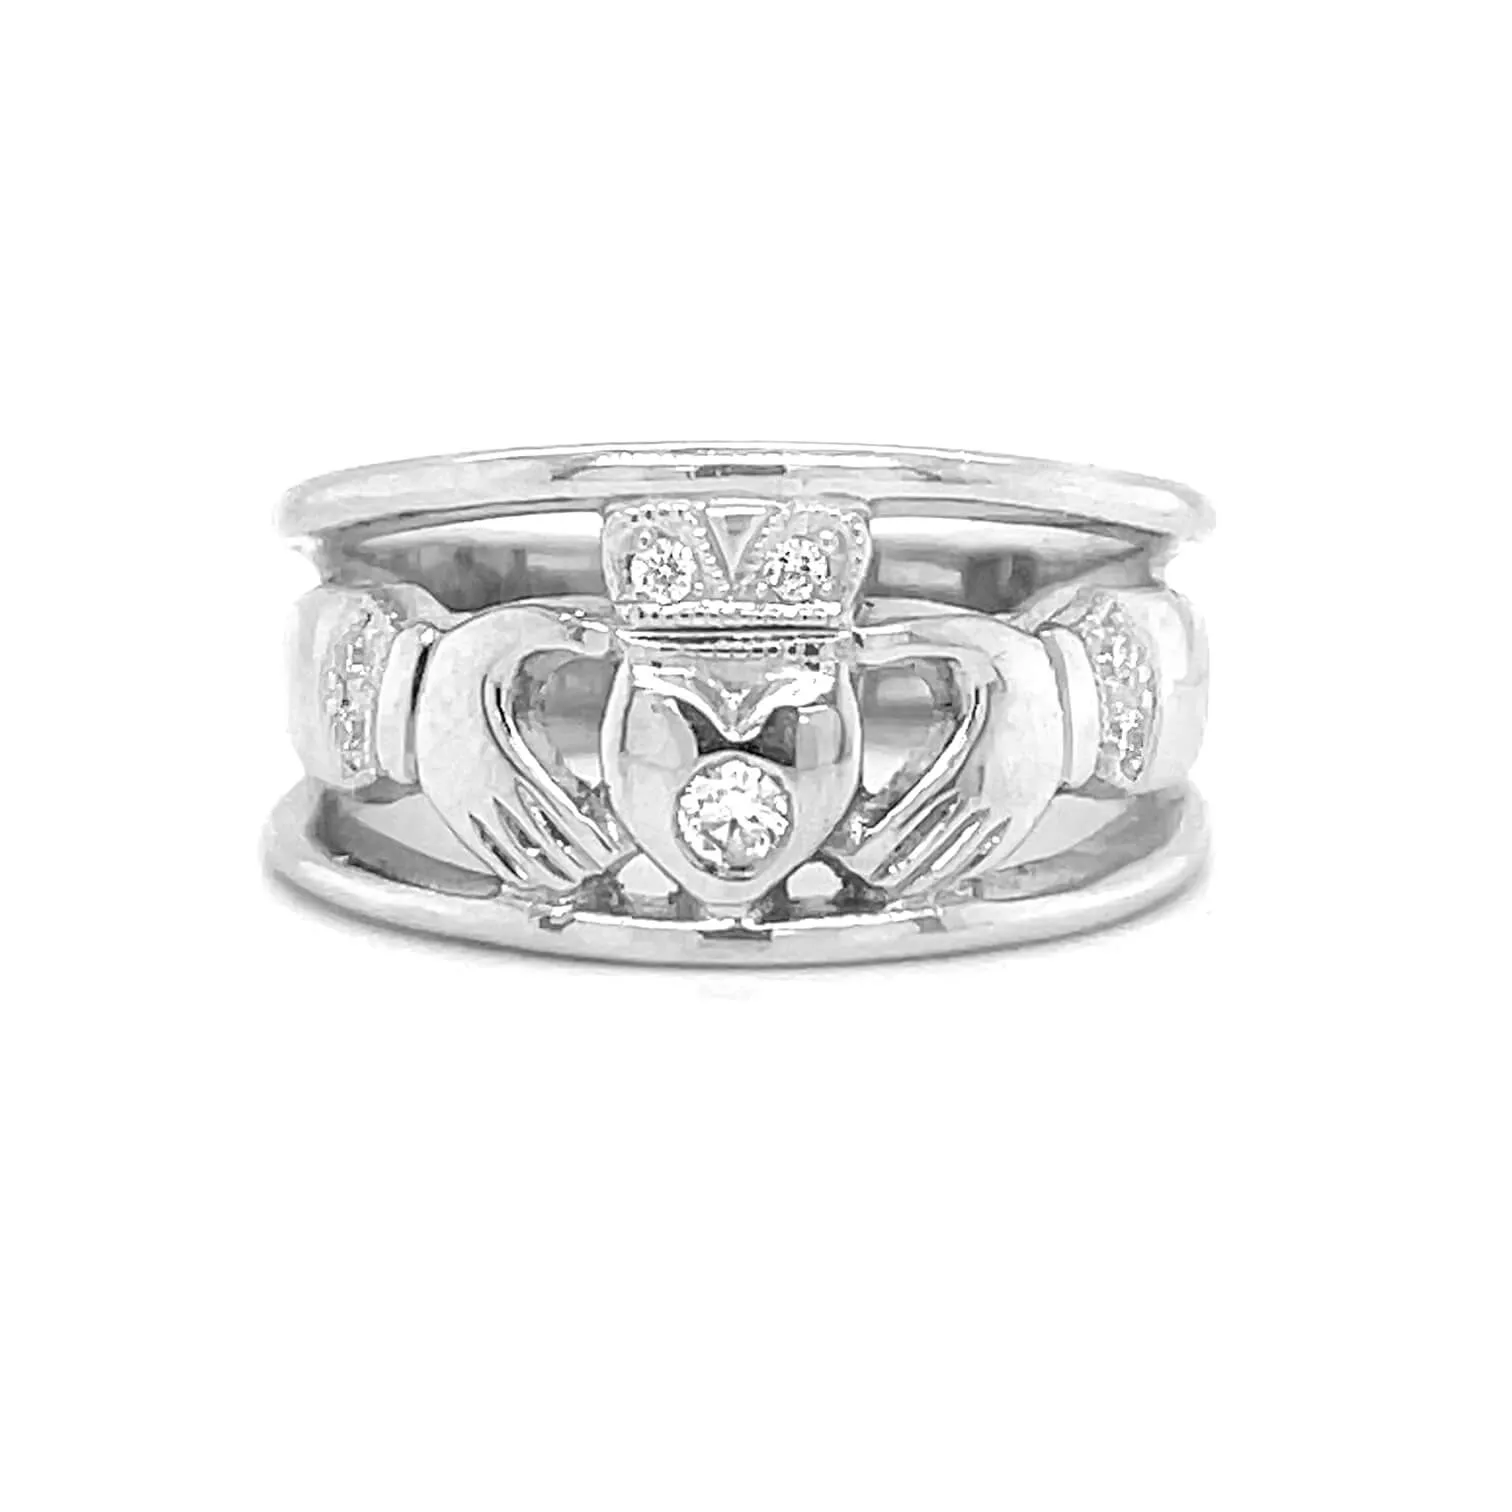 White Gold Claddagh Ring With Brilliant Cut Diamond 